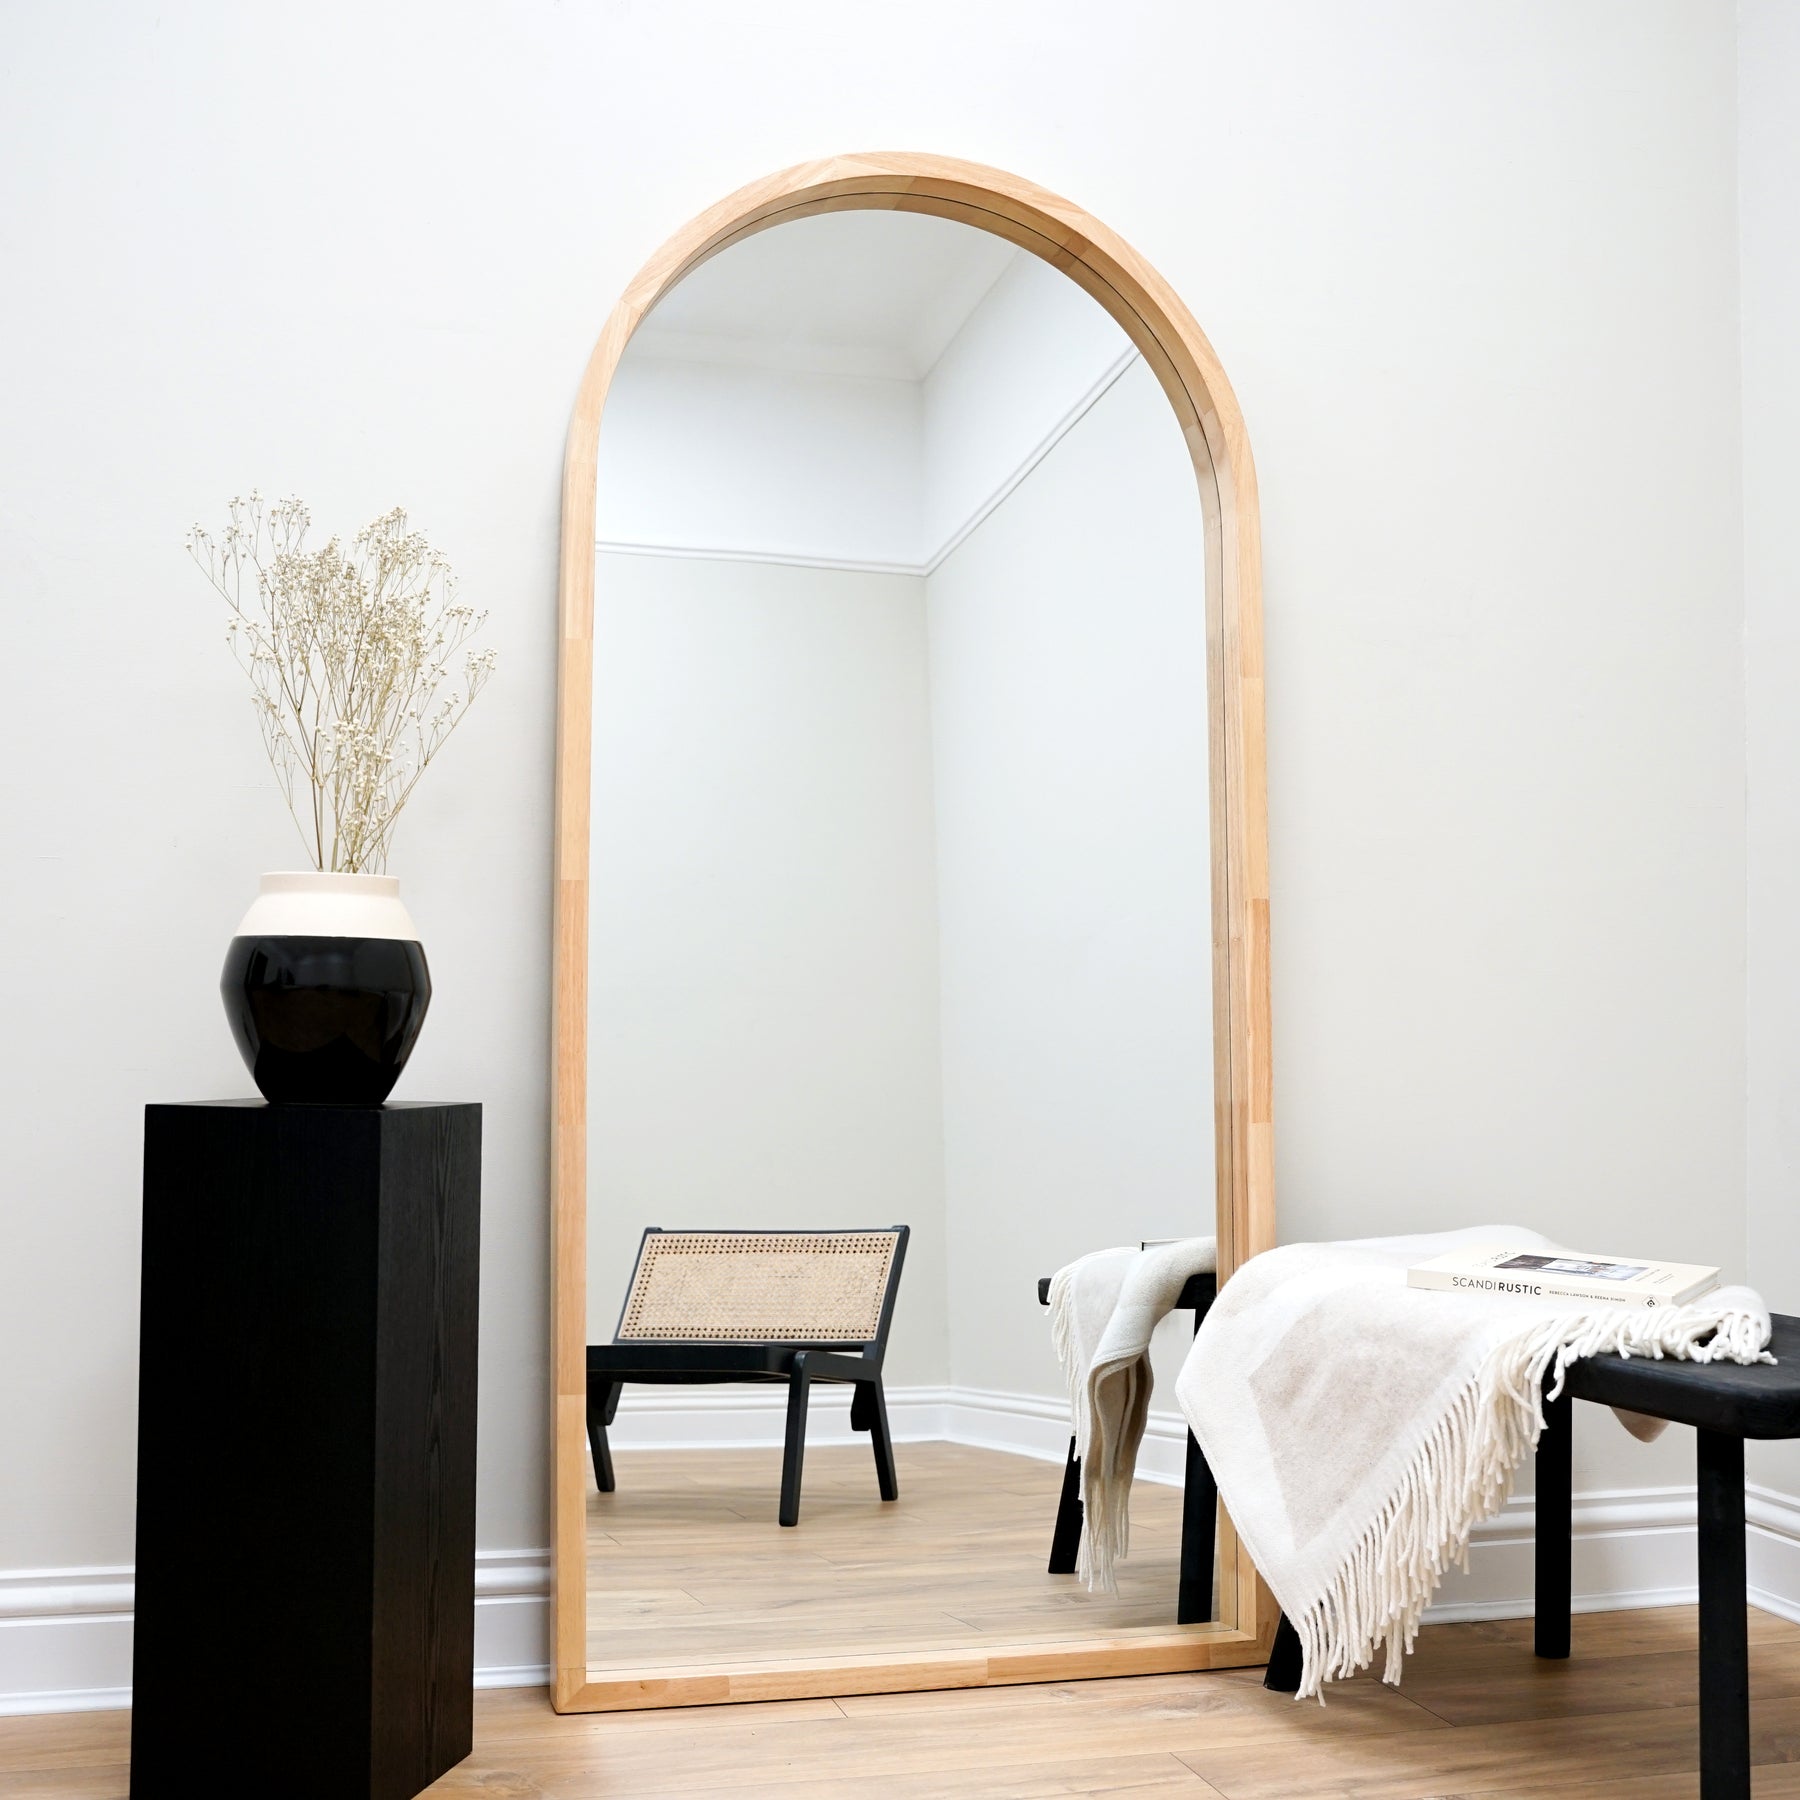 Natural Organic Full Length Wooden Arched Mirror beside pedestal